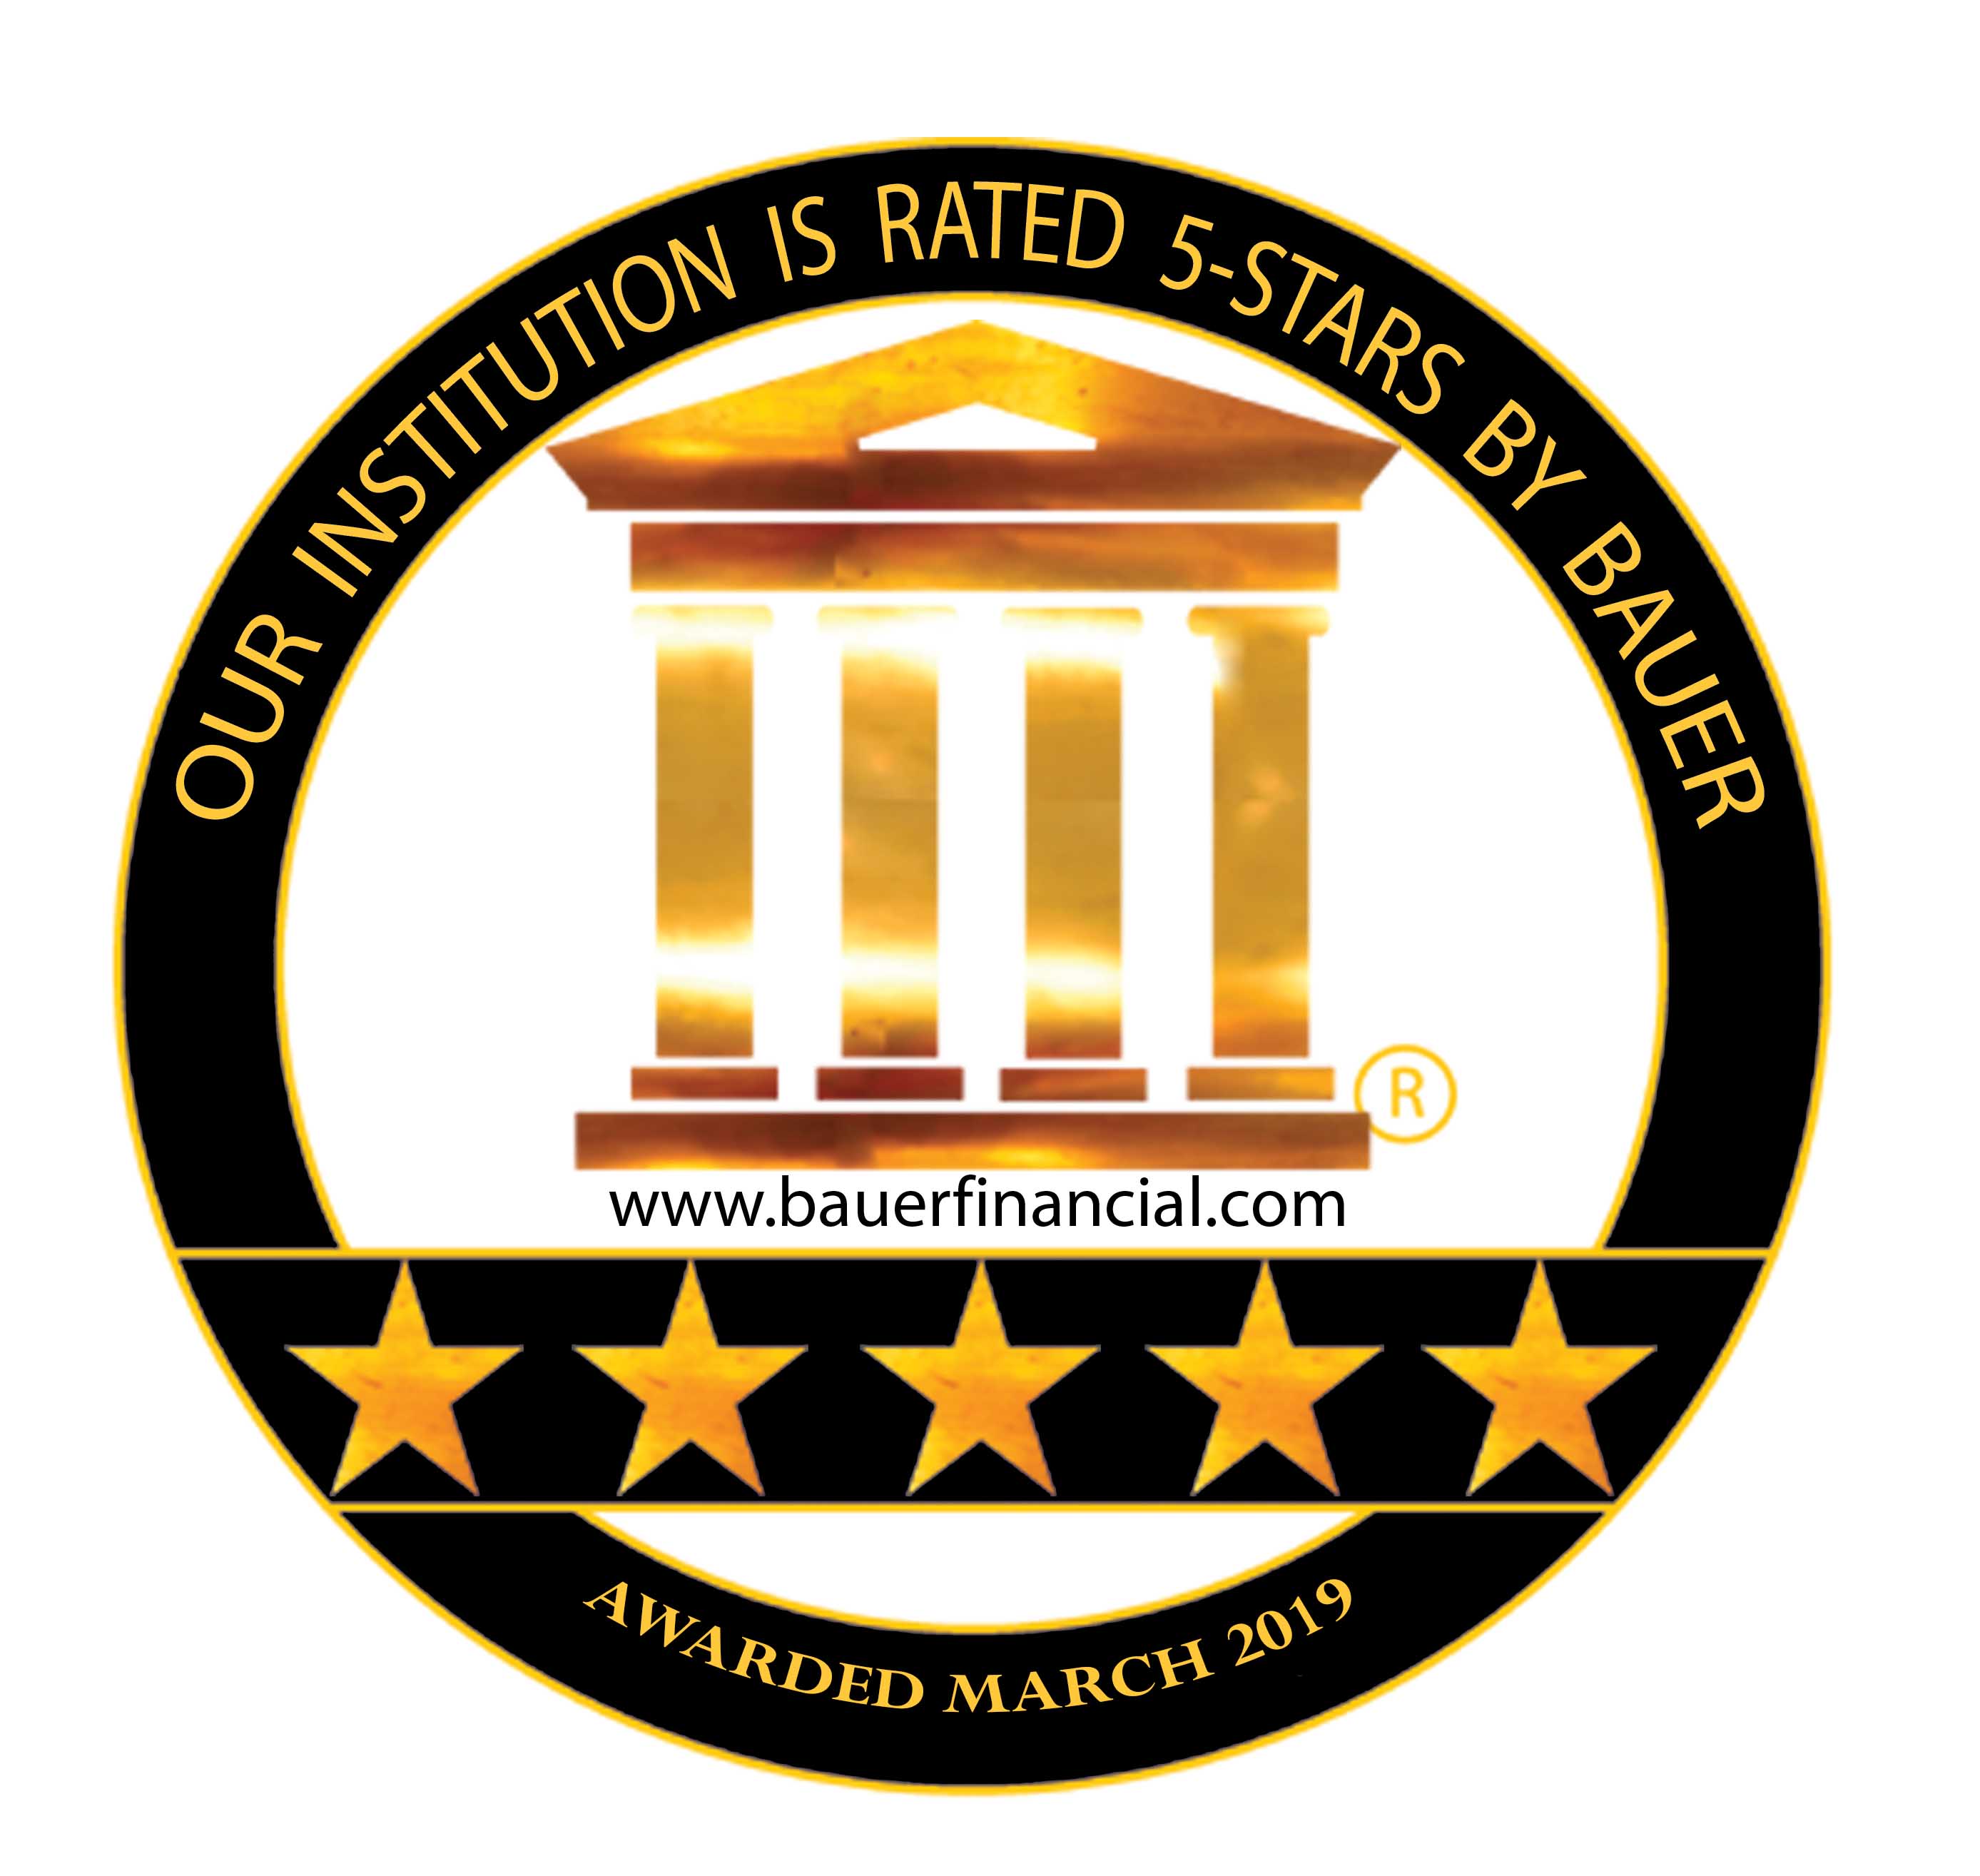 Bauer 5 Star Rating March 2019